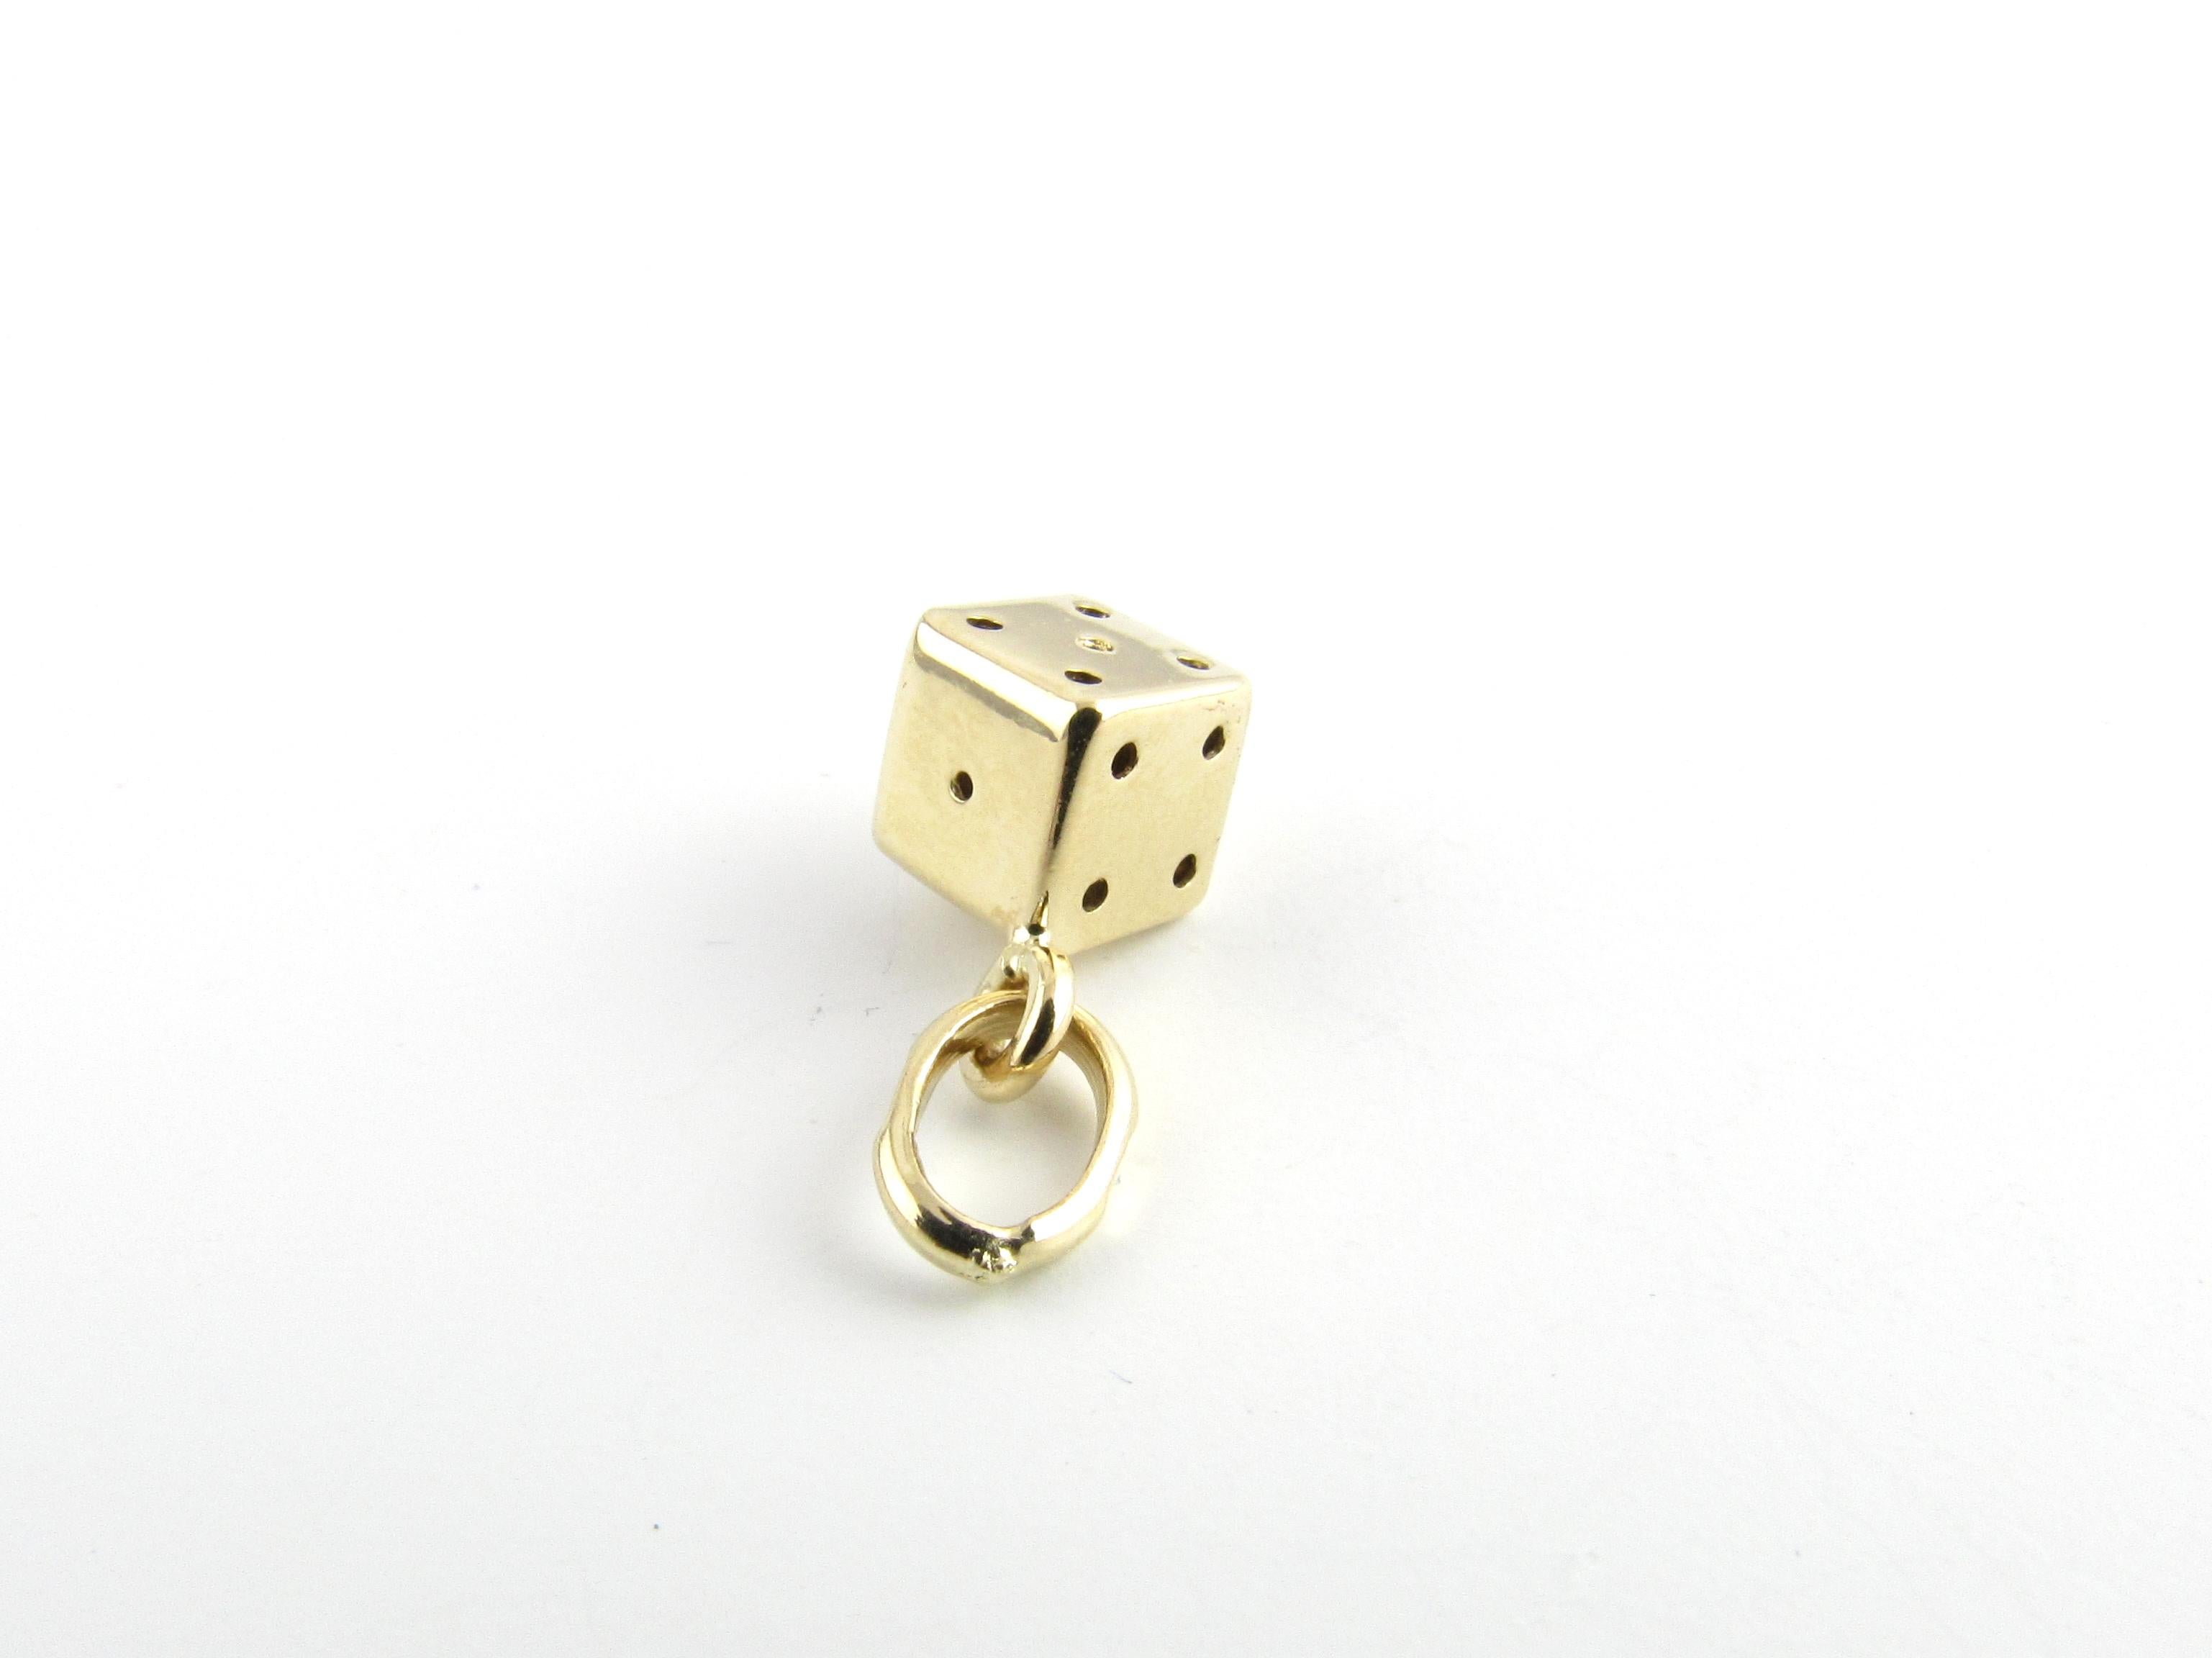 Vintage 14 Karat Yellow Gold Dice Charm

Try your luck!

This lovely 3D charm features a single die meticulously detailed in 14K yellow gold.

Size: 6 mm x 6 mm (actual charm)

Weight: 0.3 dwt. / 0.6 gr.

Stamped: 14K Italy

Very good condition,